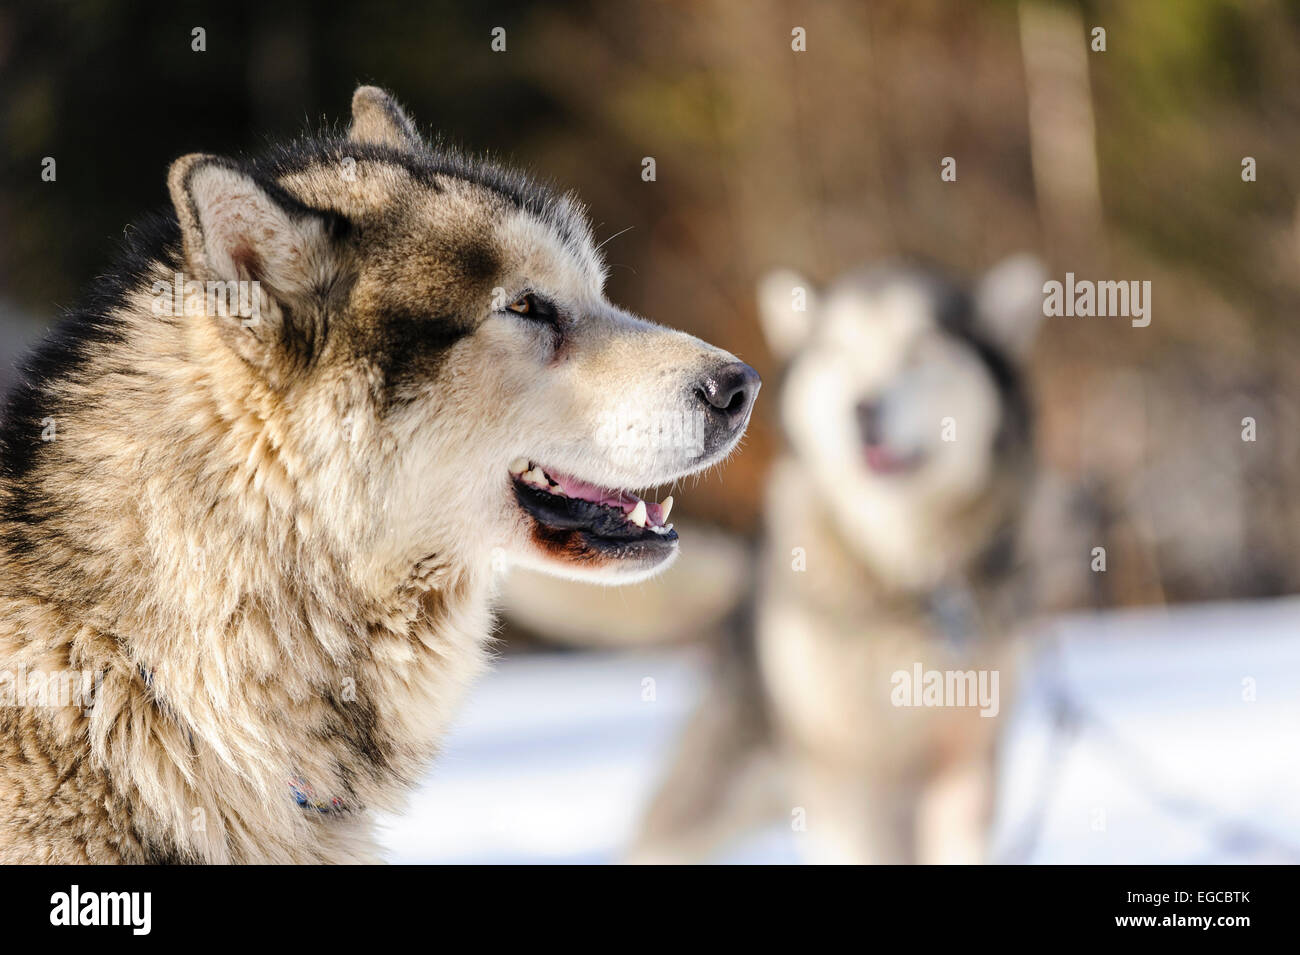 Pure bread alaskan malamute sleddogs at stakeout waiting for the competition start. Stock Photo